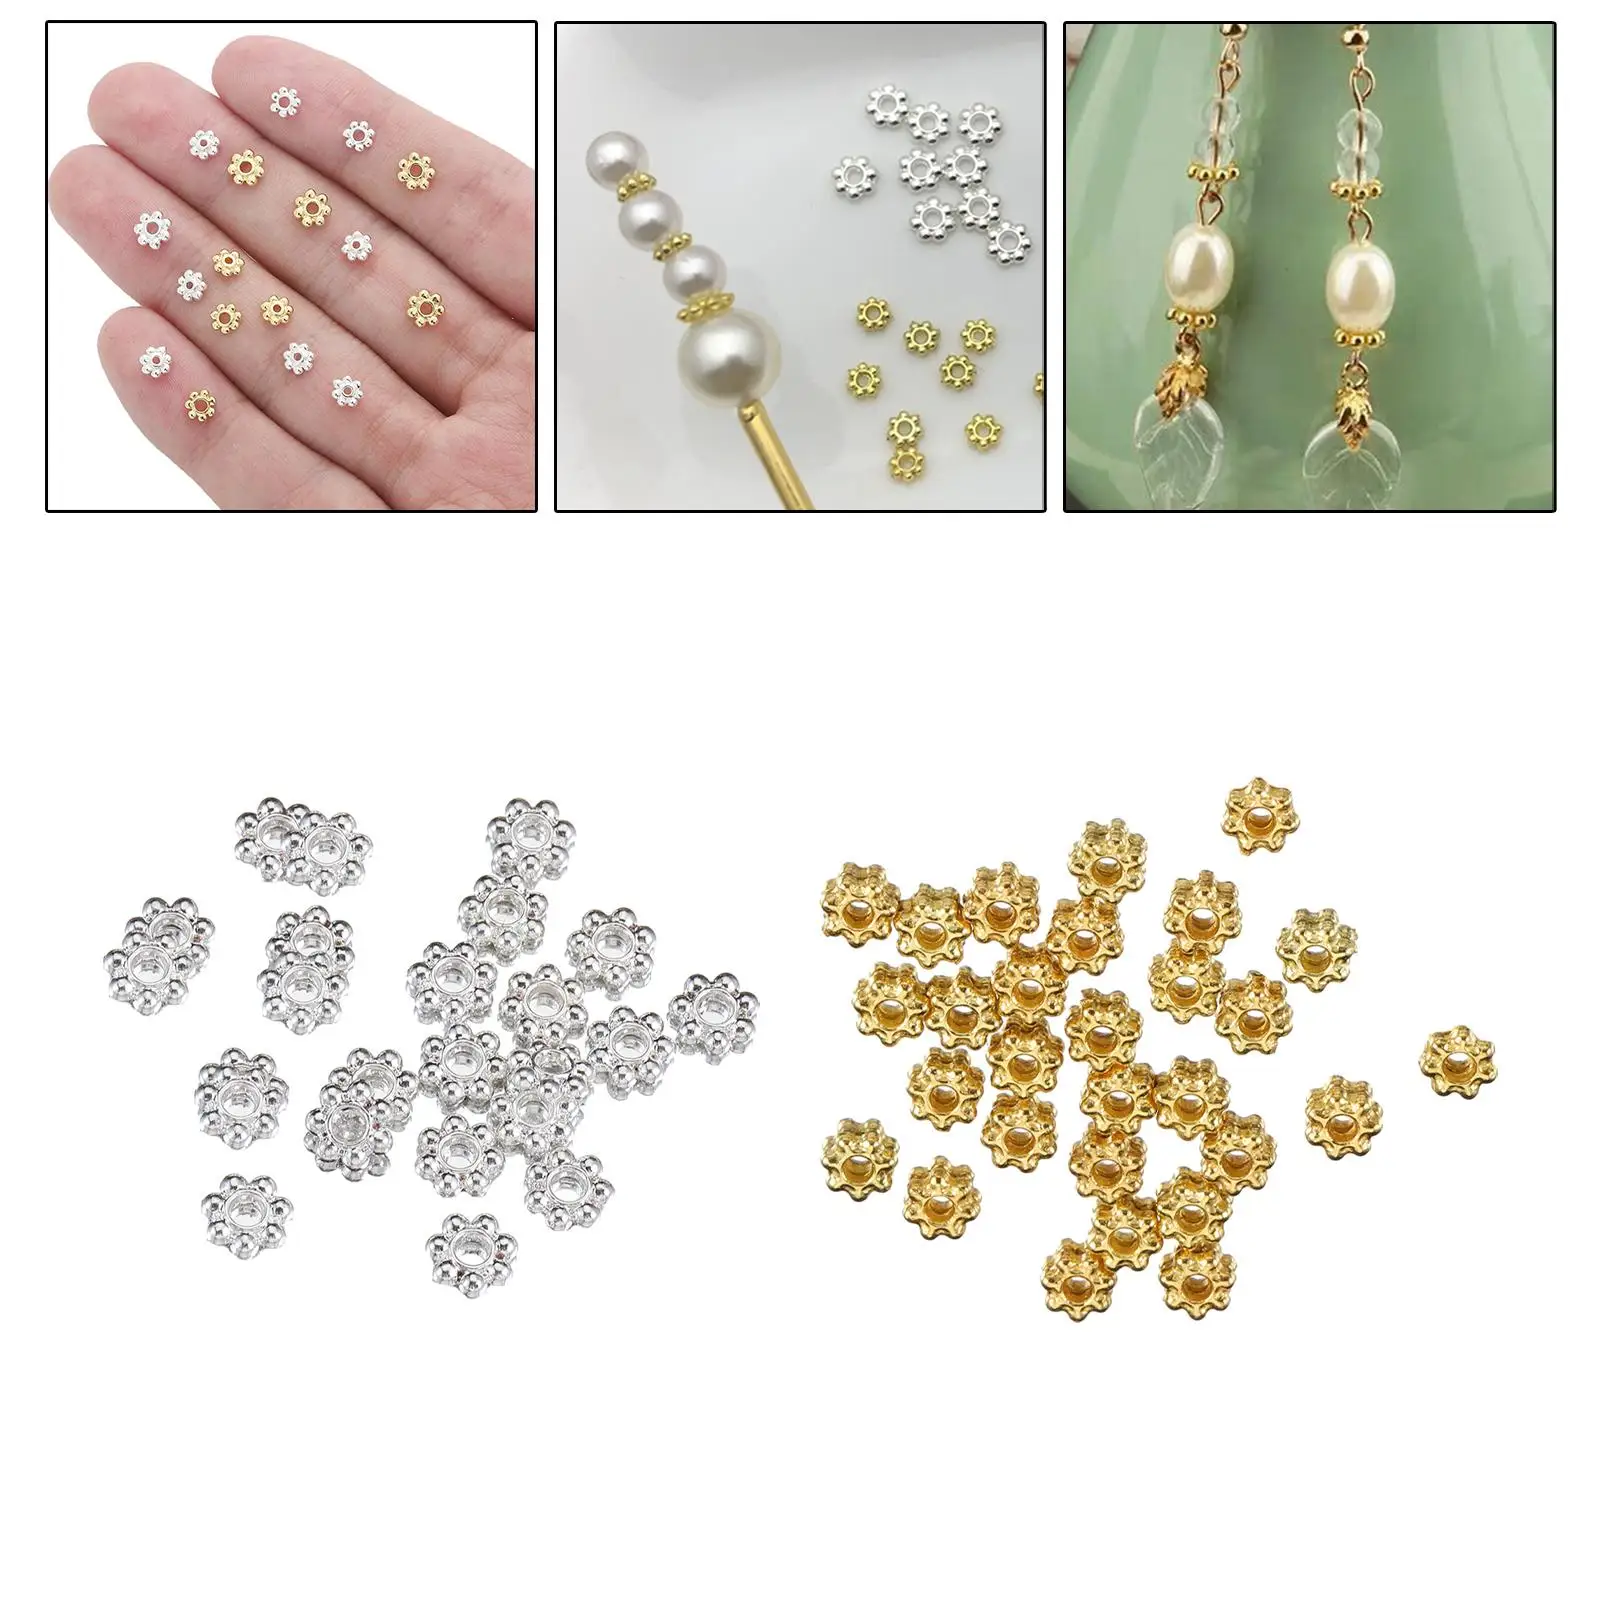 200Pcs Snowflake Spacer Beads DIY Craft Metal Decorative Loose Charm Beads for Jewelry Making Necklace Earring Bags Accessories